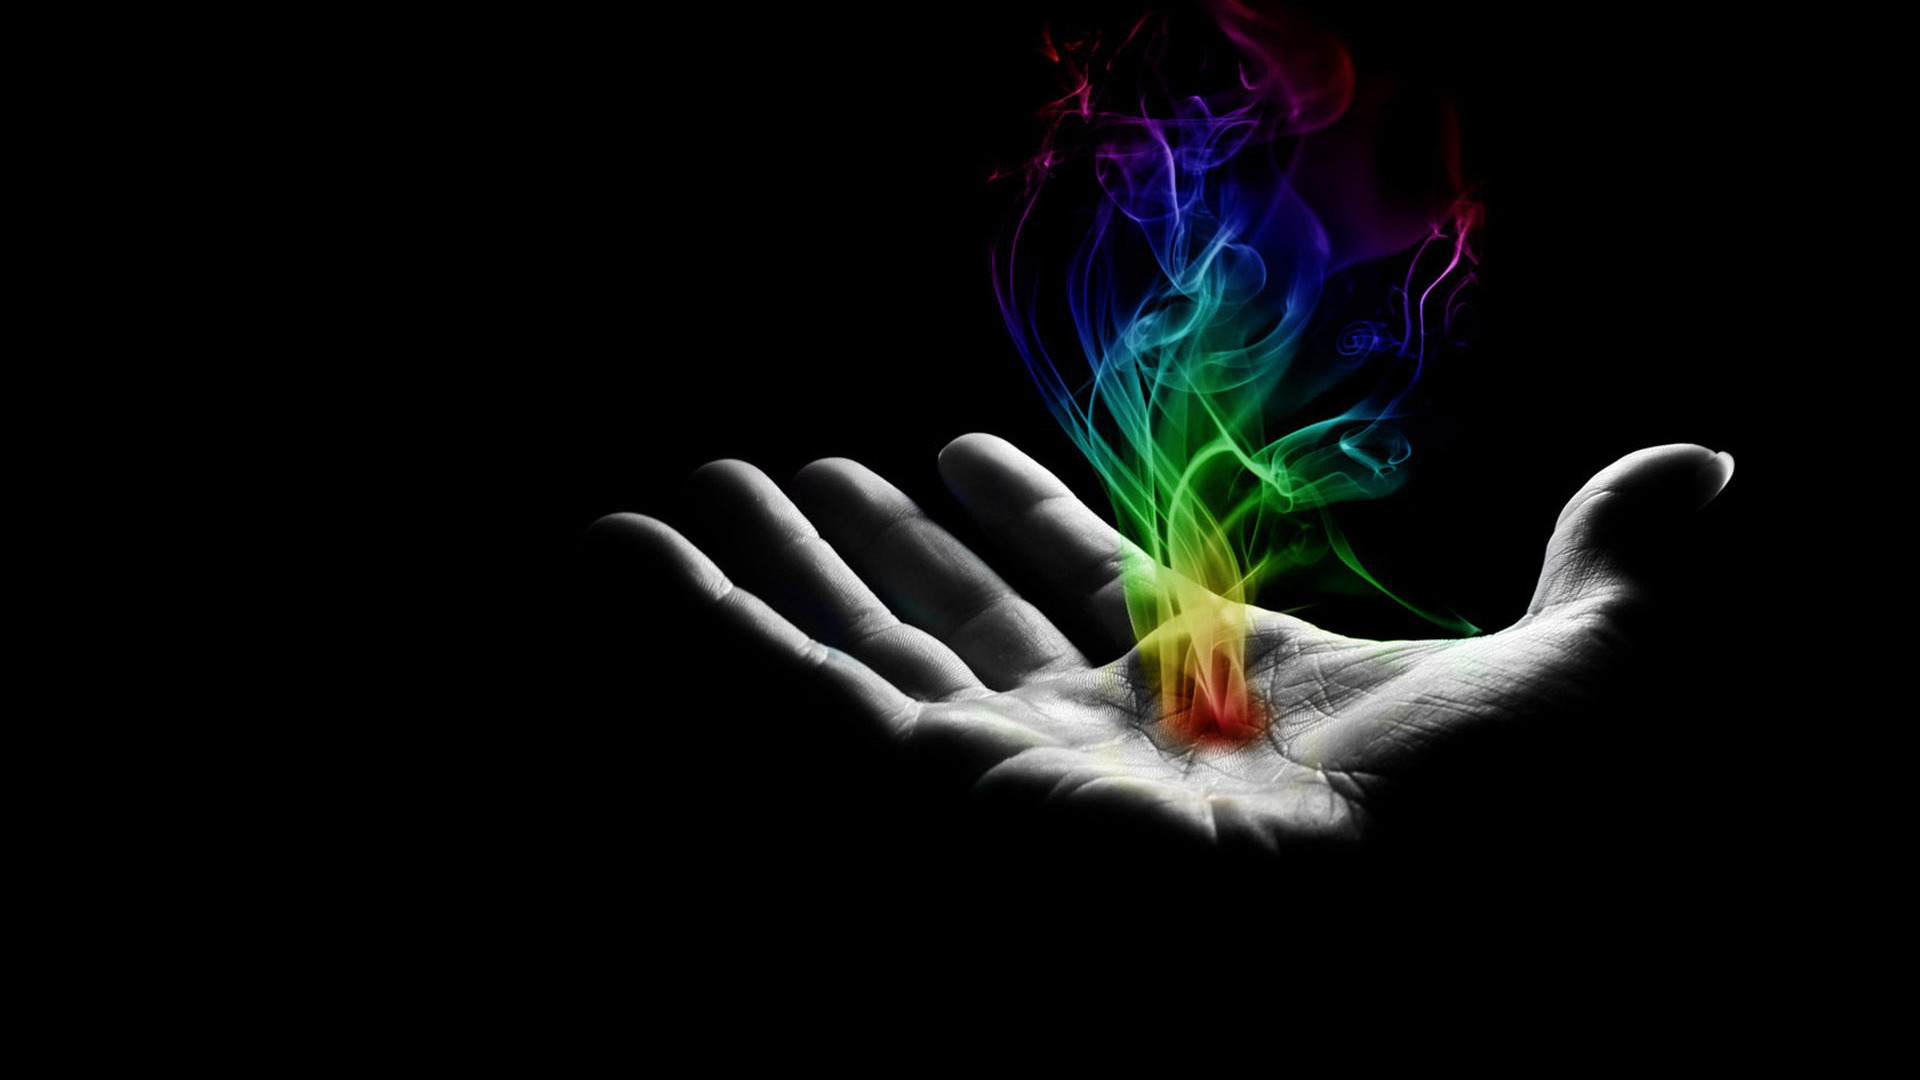 Colorful Smoke In Hand Wallpaper